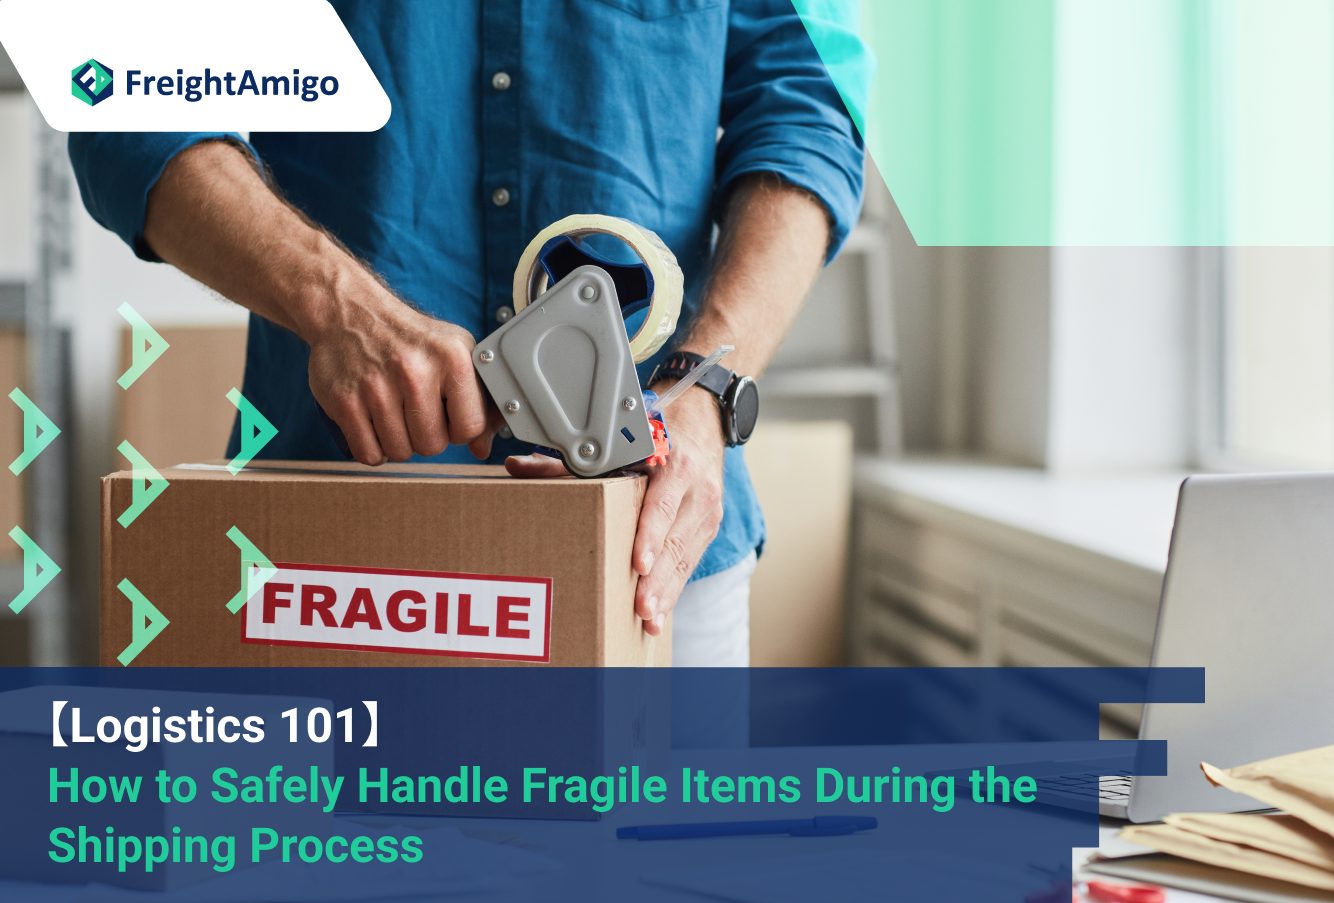 【Logistics 101】 How to Safely Handle Fragile Items During the Shipping Process